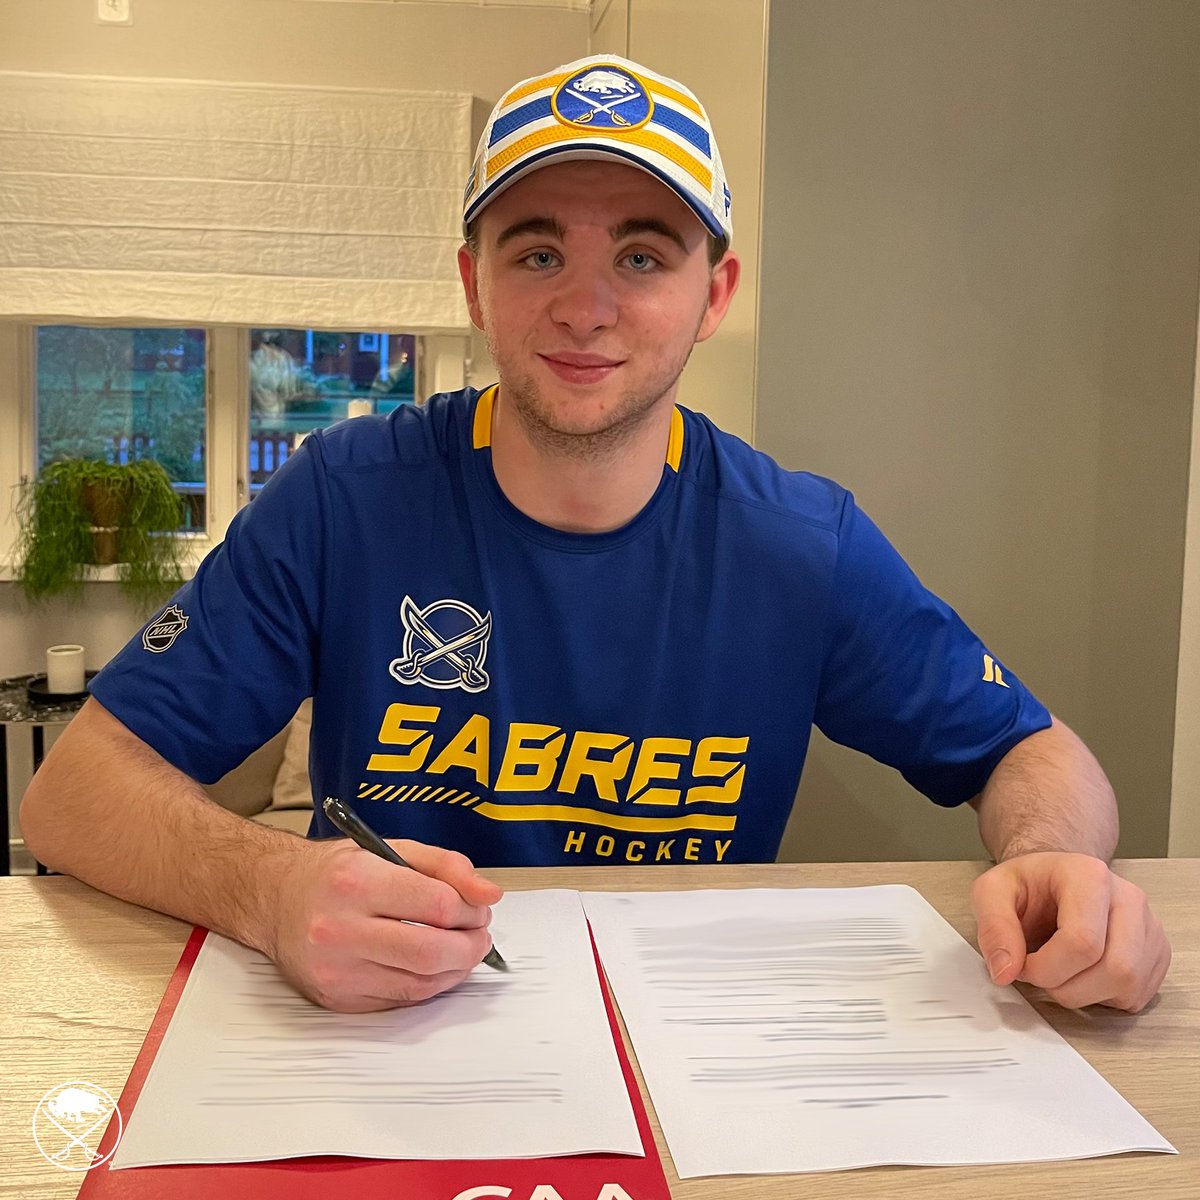 Aaaand he's official 🖊 Welcome to the Sabres fam, Isak Rosen! #LetsGoBuffalo